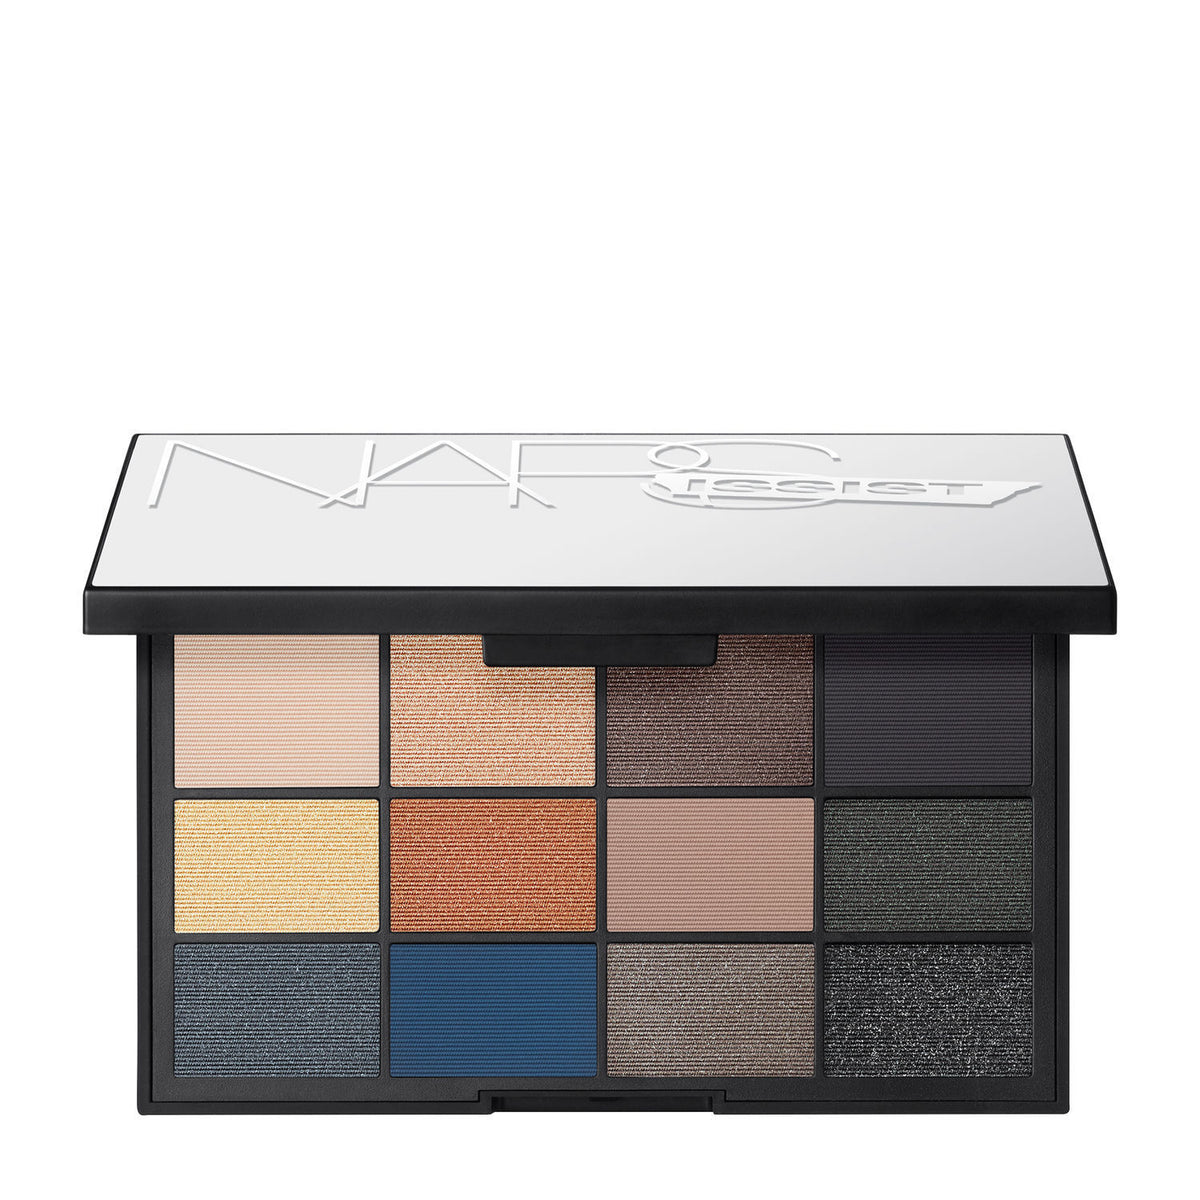 Nars Issist L'amour Toujours Eyeshadow Palette